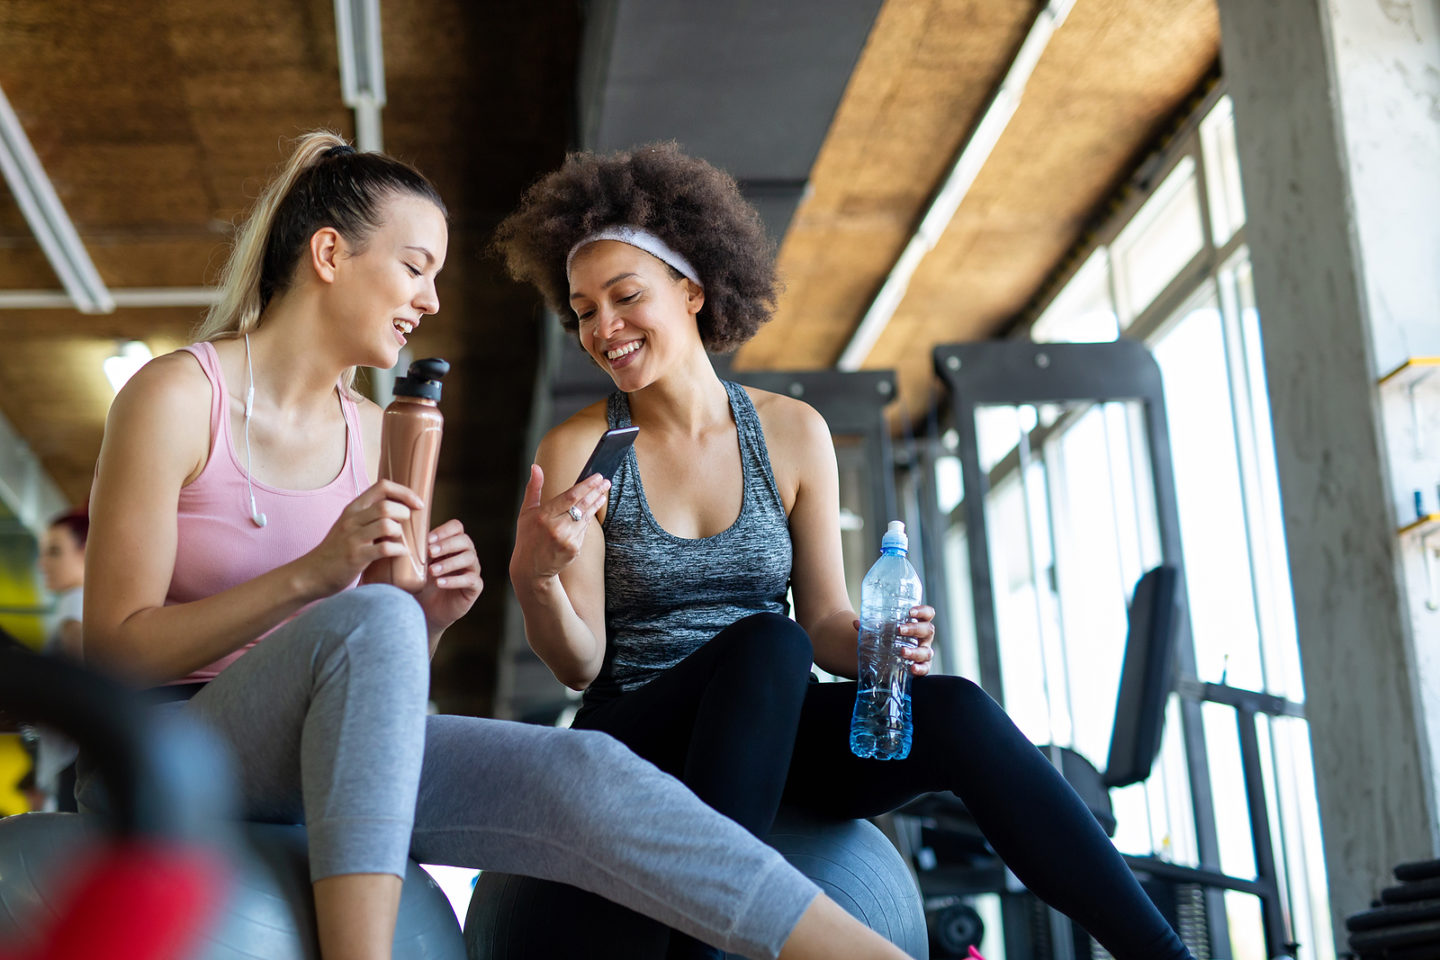 Beautiful women working out in gym together to stay healthy. Sport, people, friend concept.